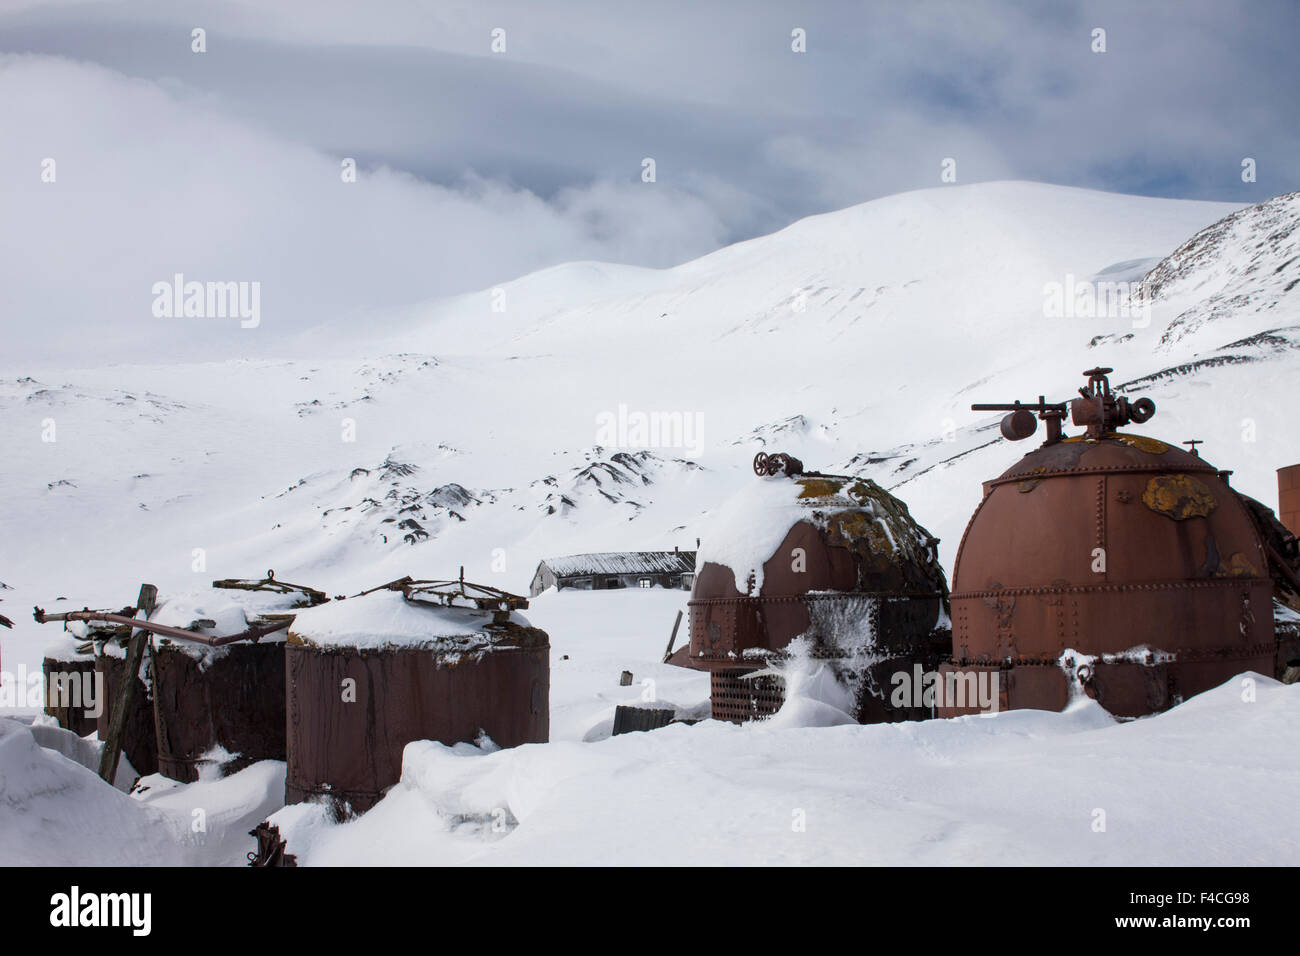 Antarctica, South Shetland Islands, Rusted boilers in late winter snow at abandoned whaling station at Whalers Cove on Deception Island. Stock Photo